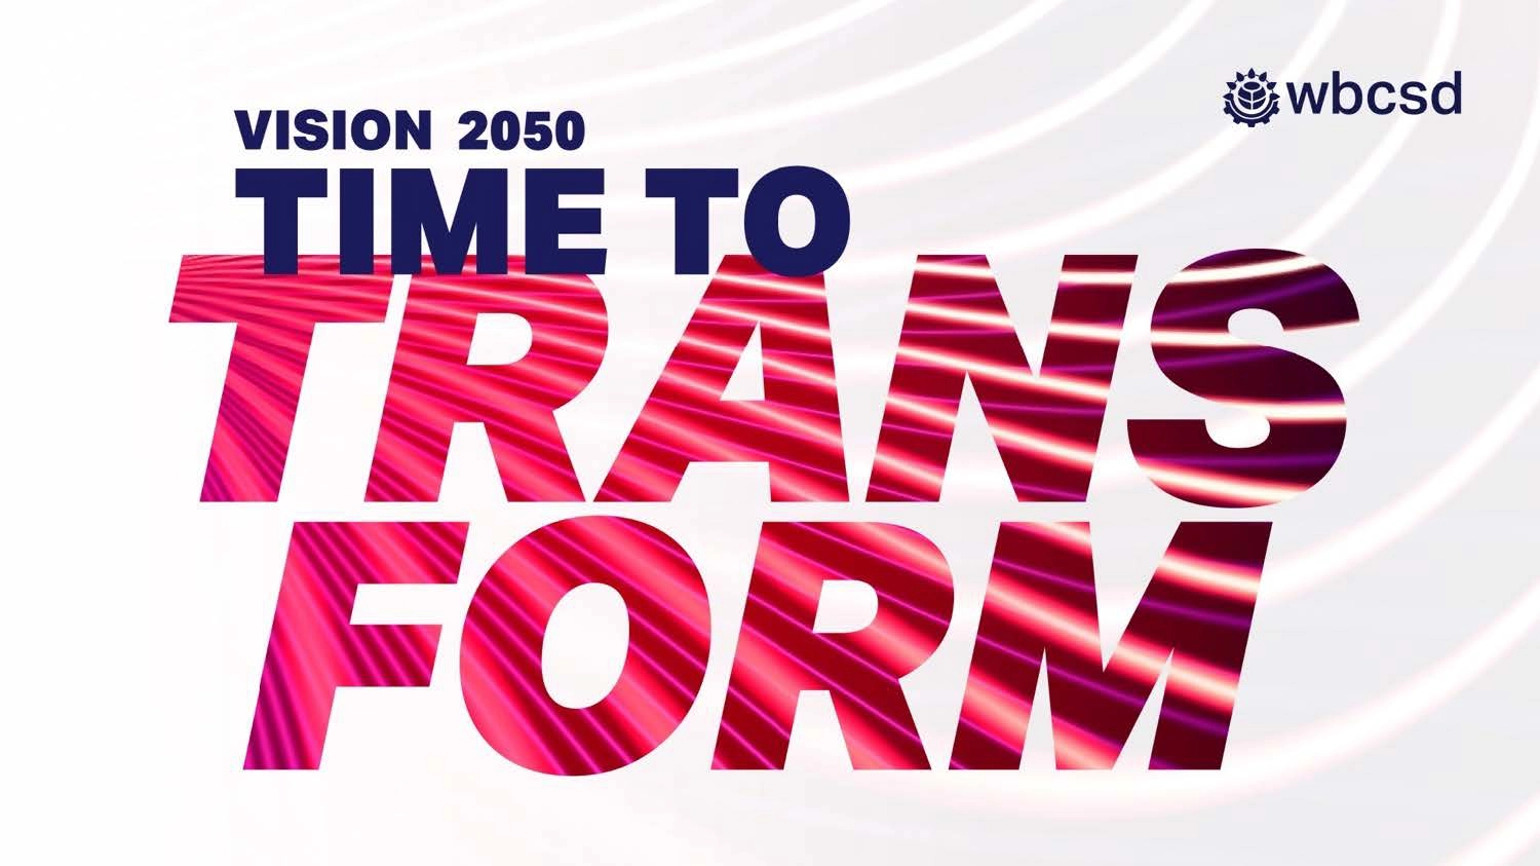 Image featuring WBCSD logo, reading 'Vision 2050, Time To Transform'